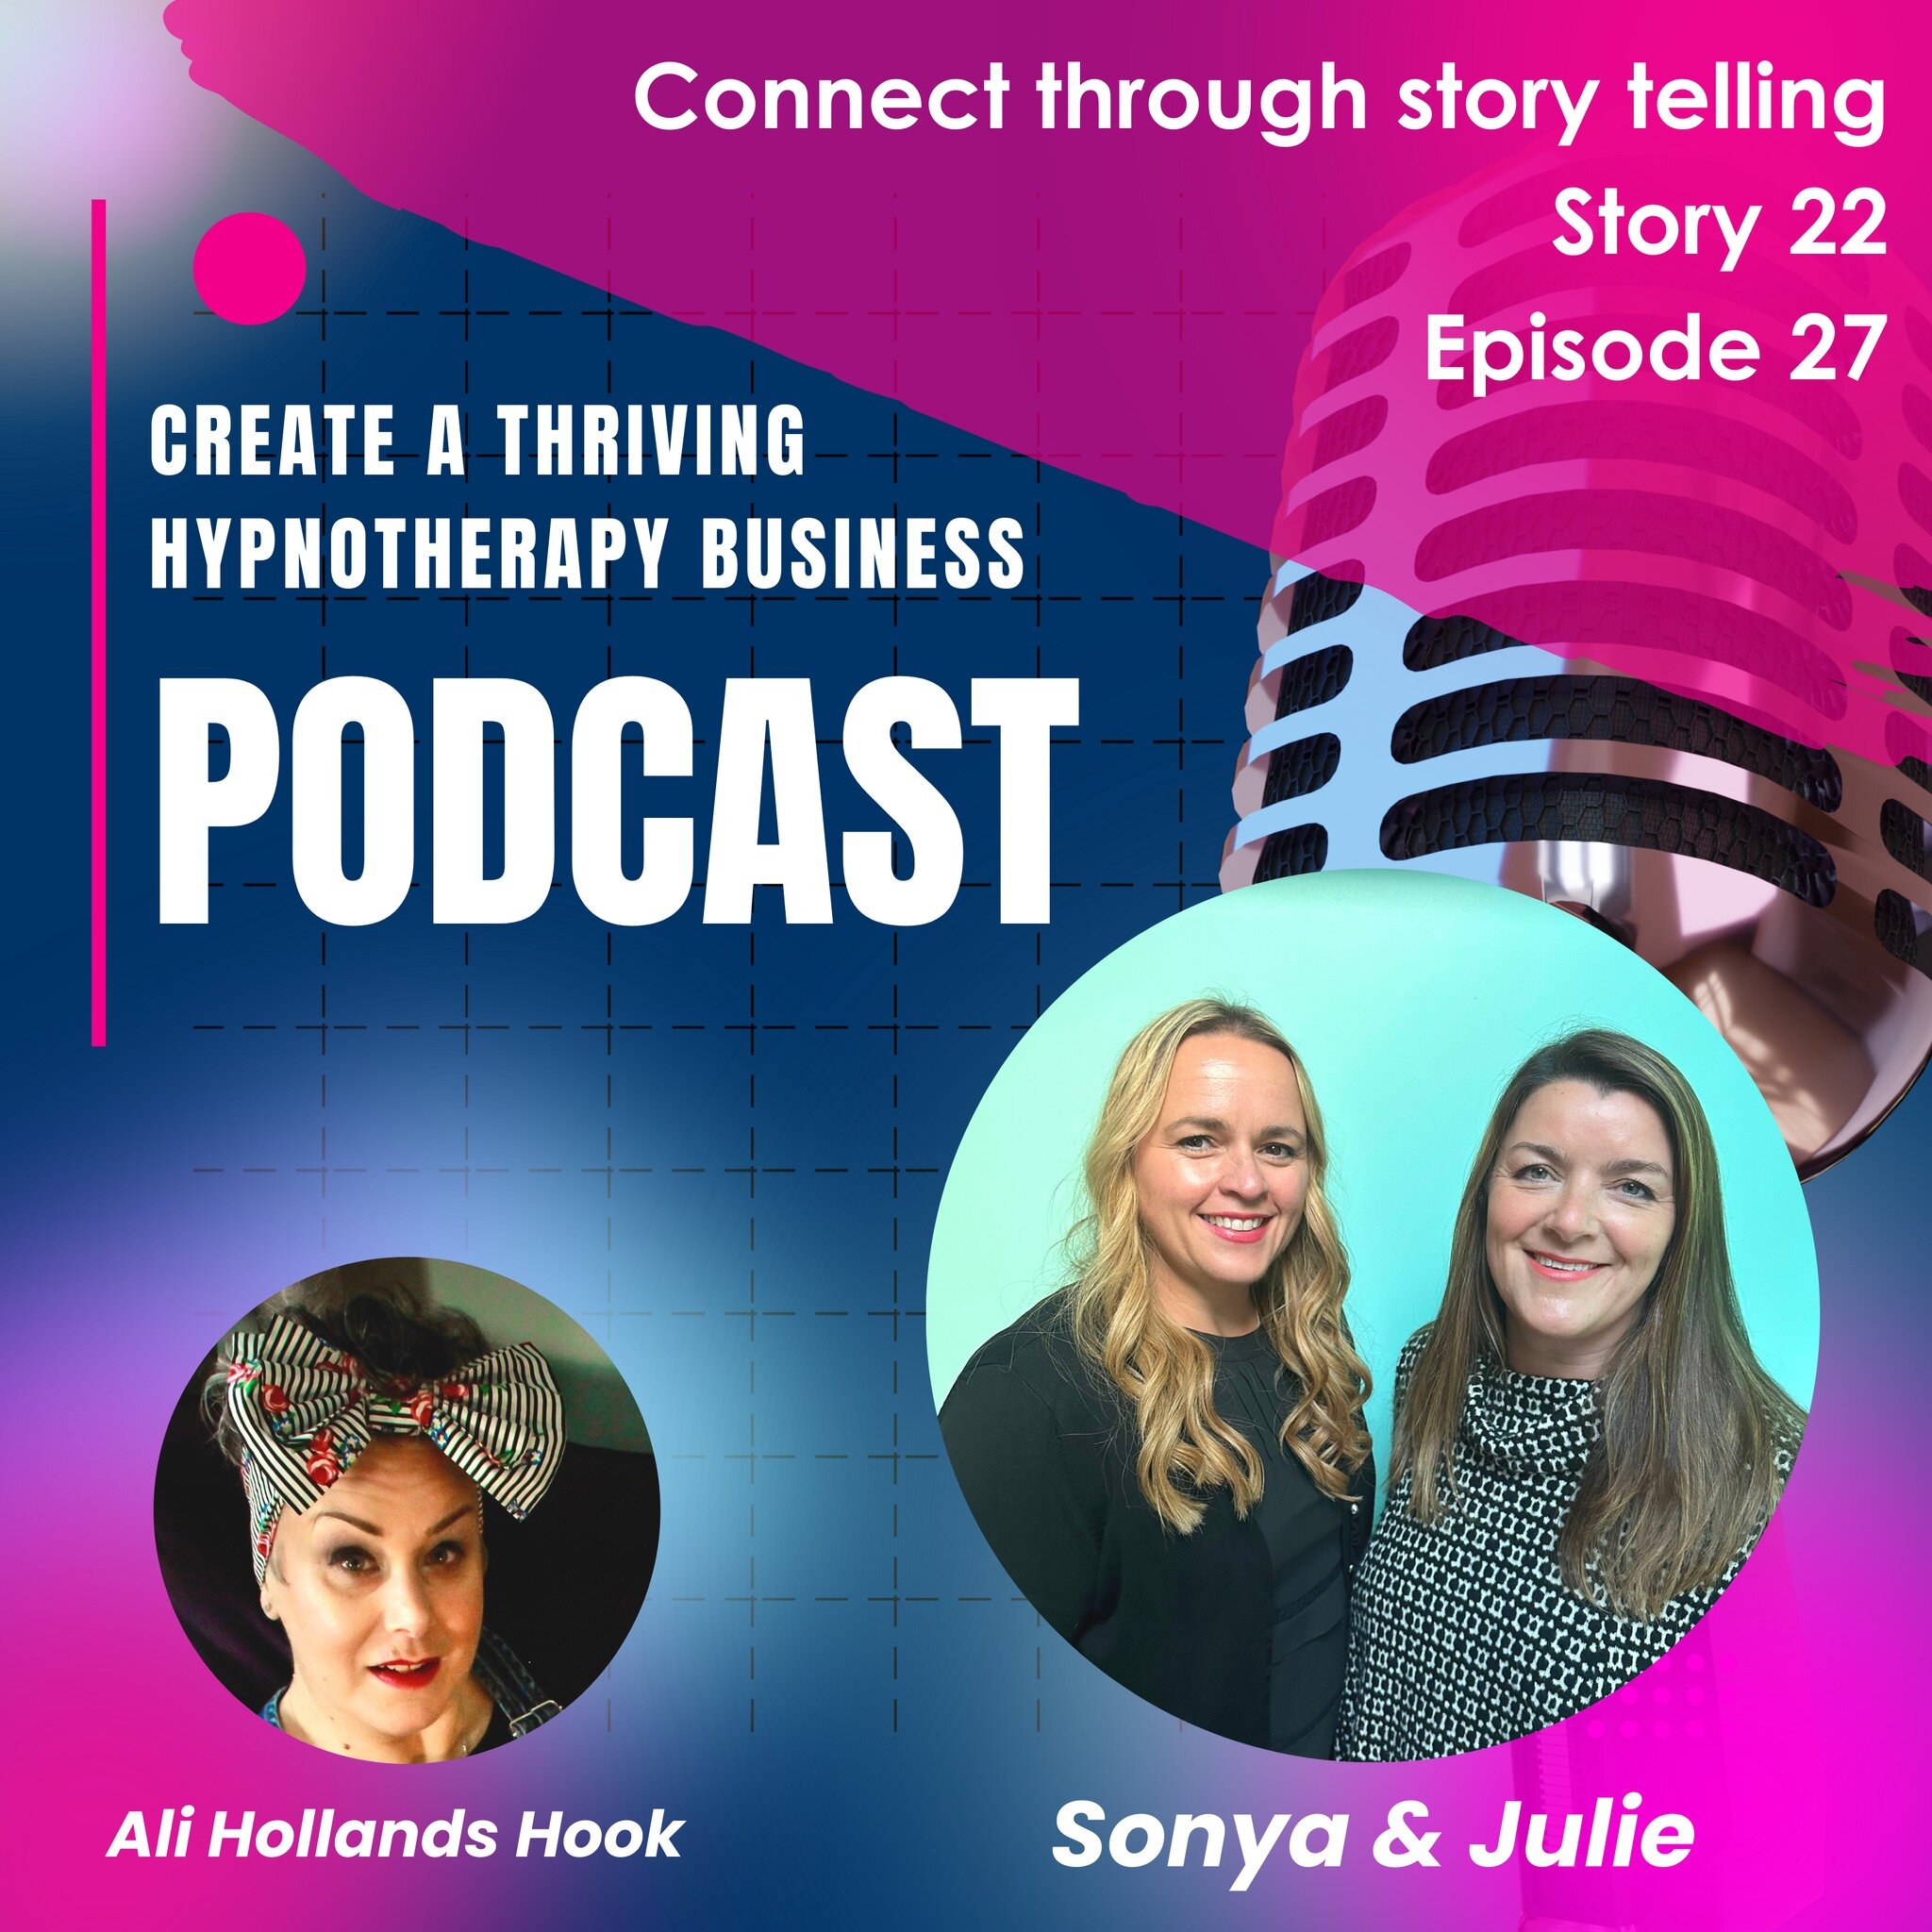 Sonya and Julie of @story22_storybrandguides were a blast. With half a century of marketing skill and experience between them they are a formidable force and a team. They have a way of getting right to the core of your story and then teaching you how